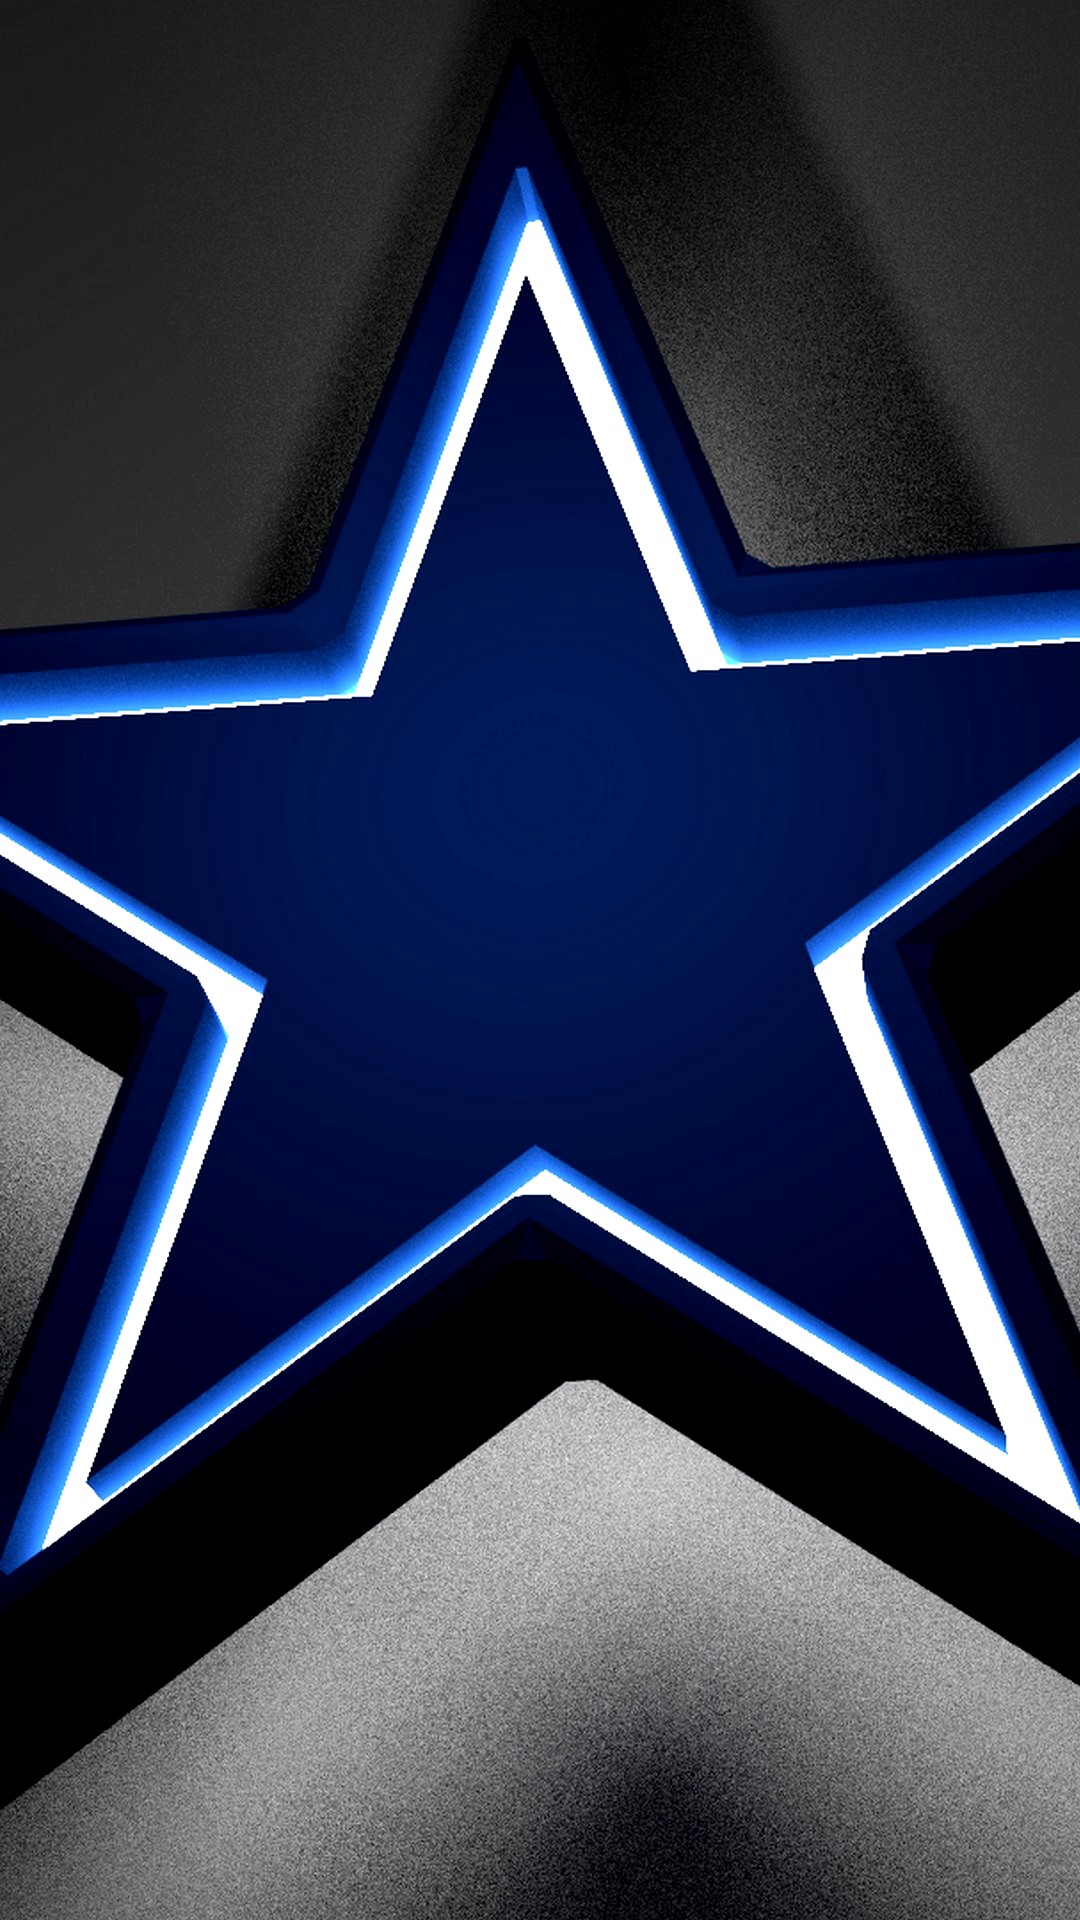 Cowboys Football iPhone Wallpaper Size with high-resolution 1080x1920 pixel. You can use this wallpaper for your Mac or Windows Desktop Background, iPhone, Android or Tablet and another Smartphone device